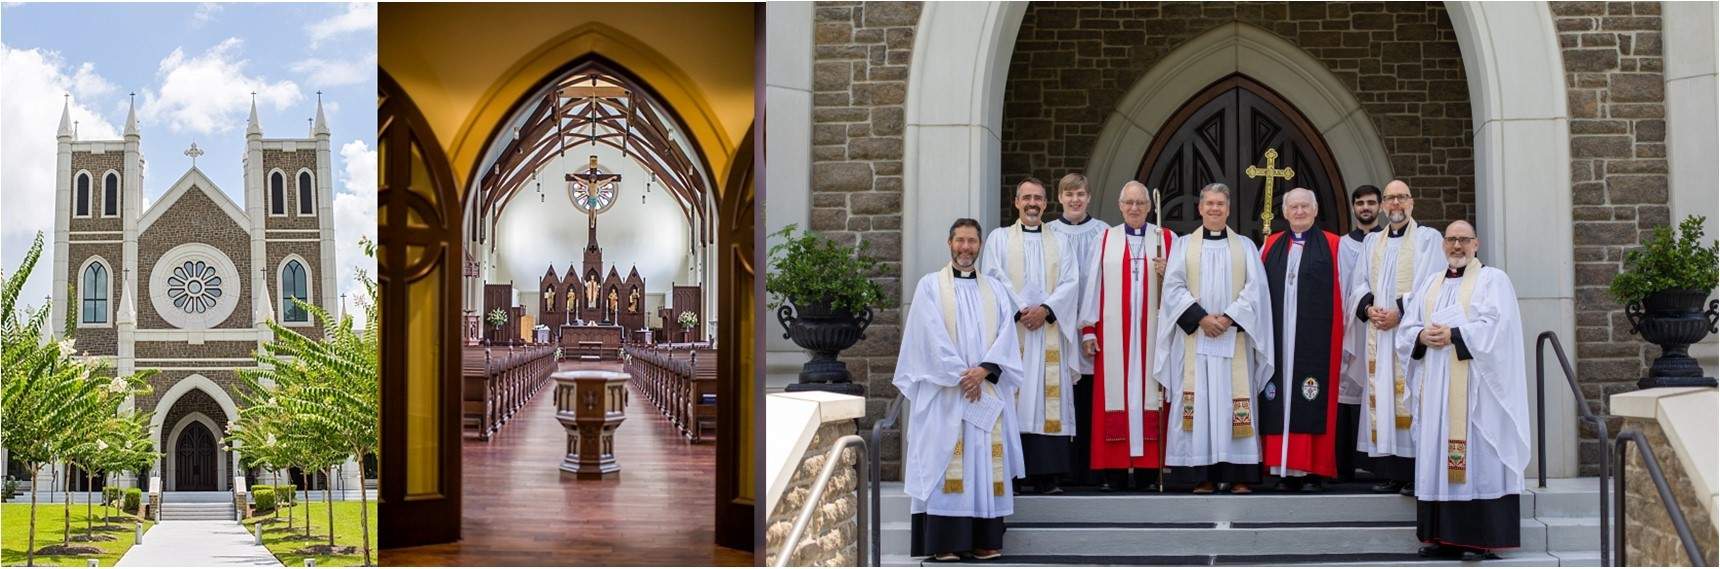 Three photos, exterior and  interior of St Peters Cathedral Anglicanism and photos of the religious staff standing on the church steps